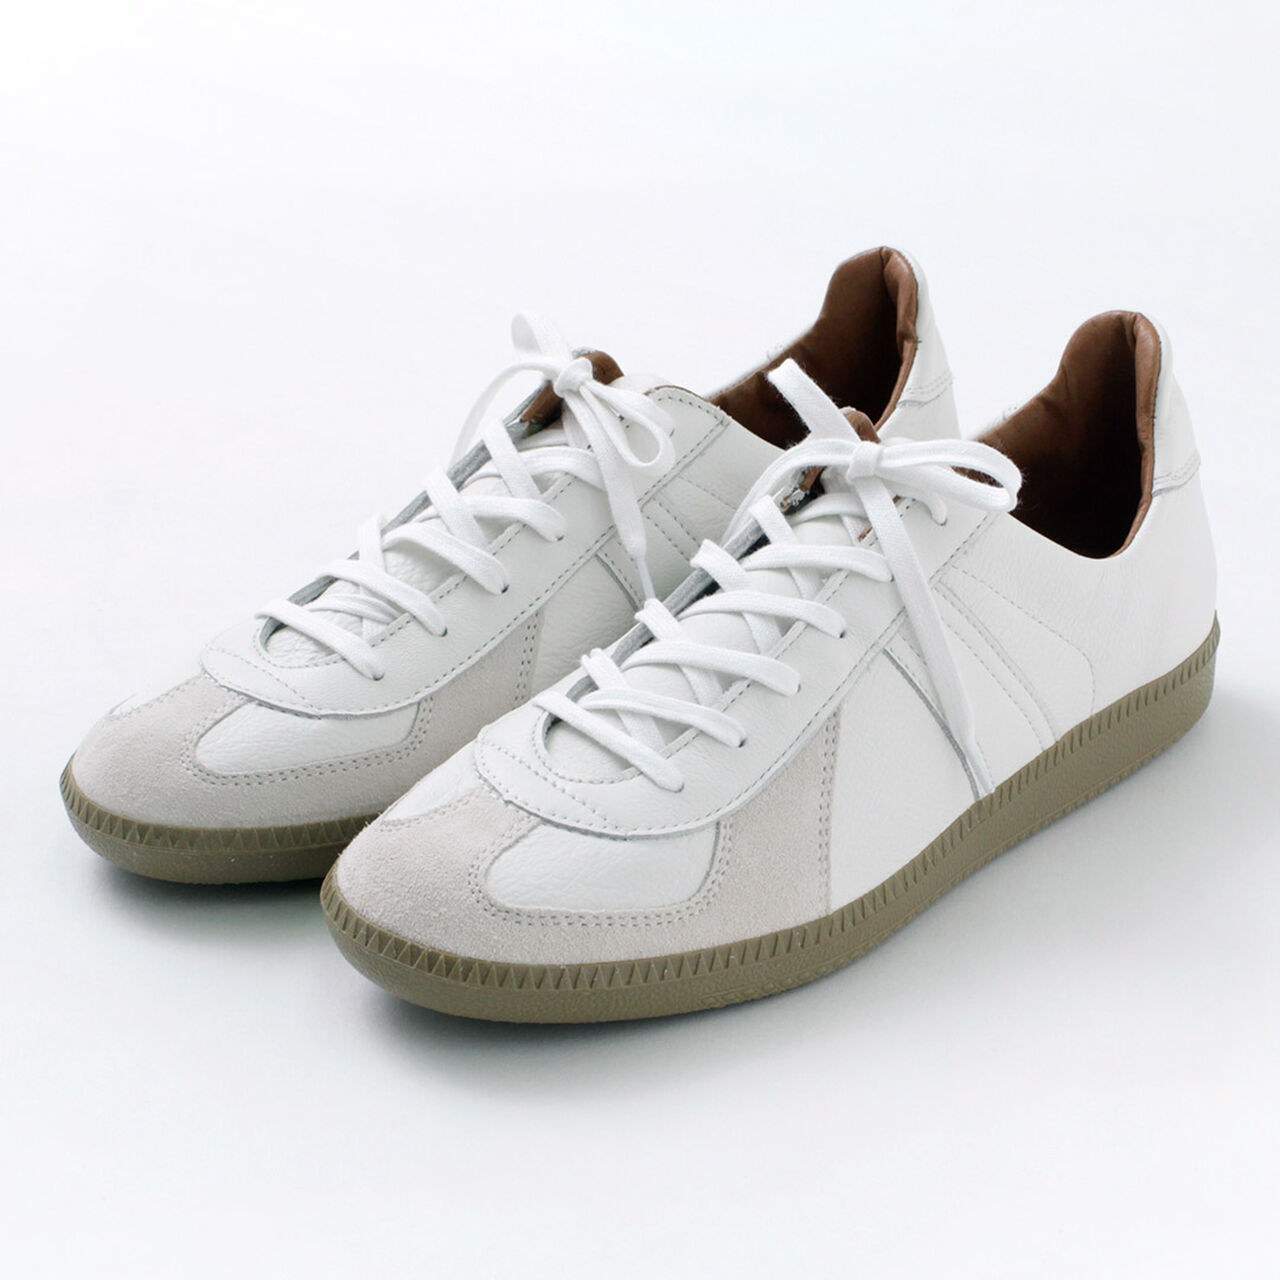 REPRODUCTION OF FOUND German Trainer Sneakers